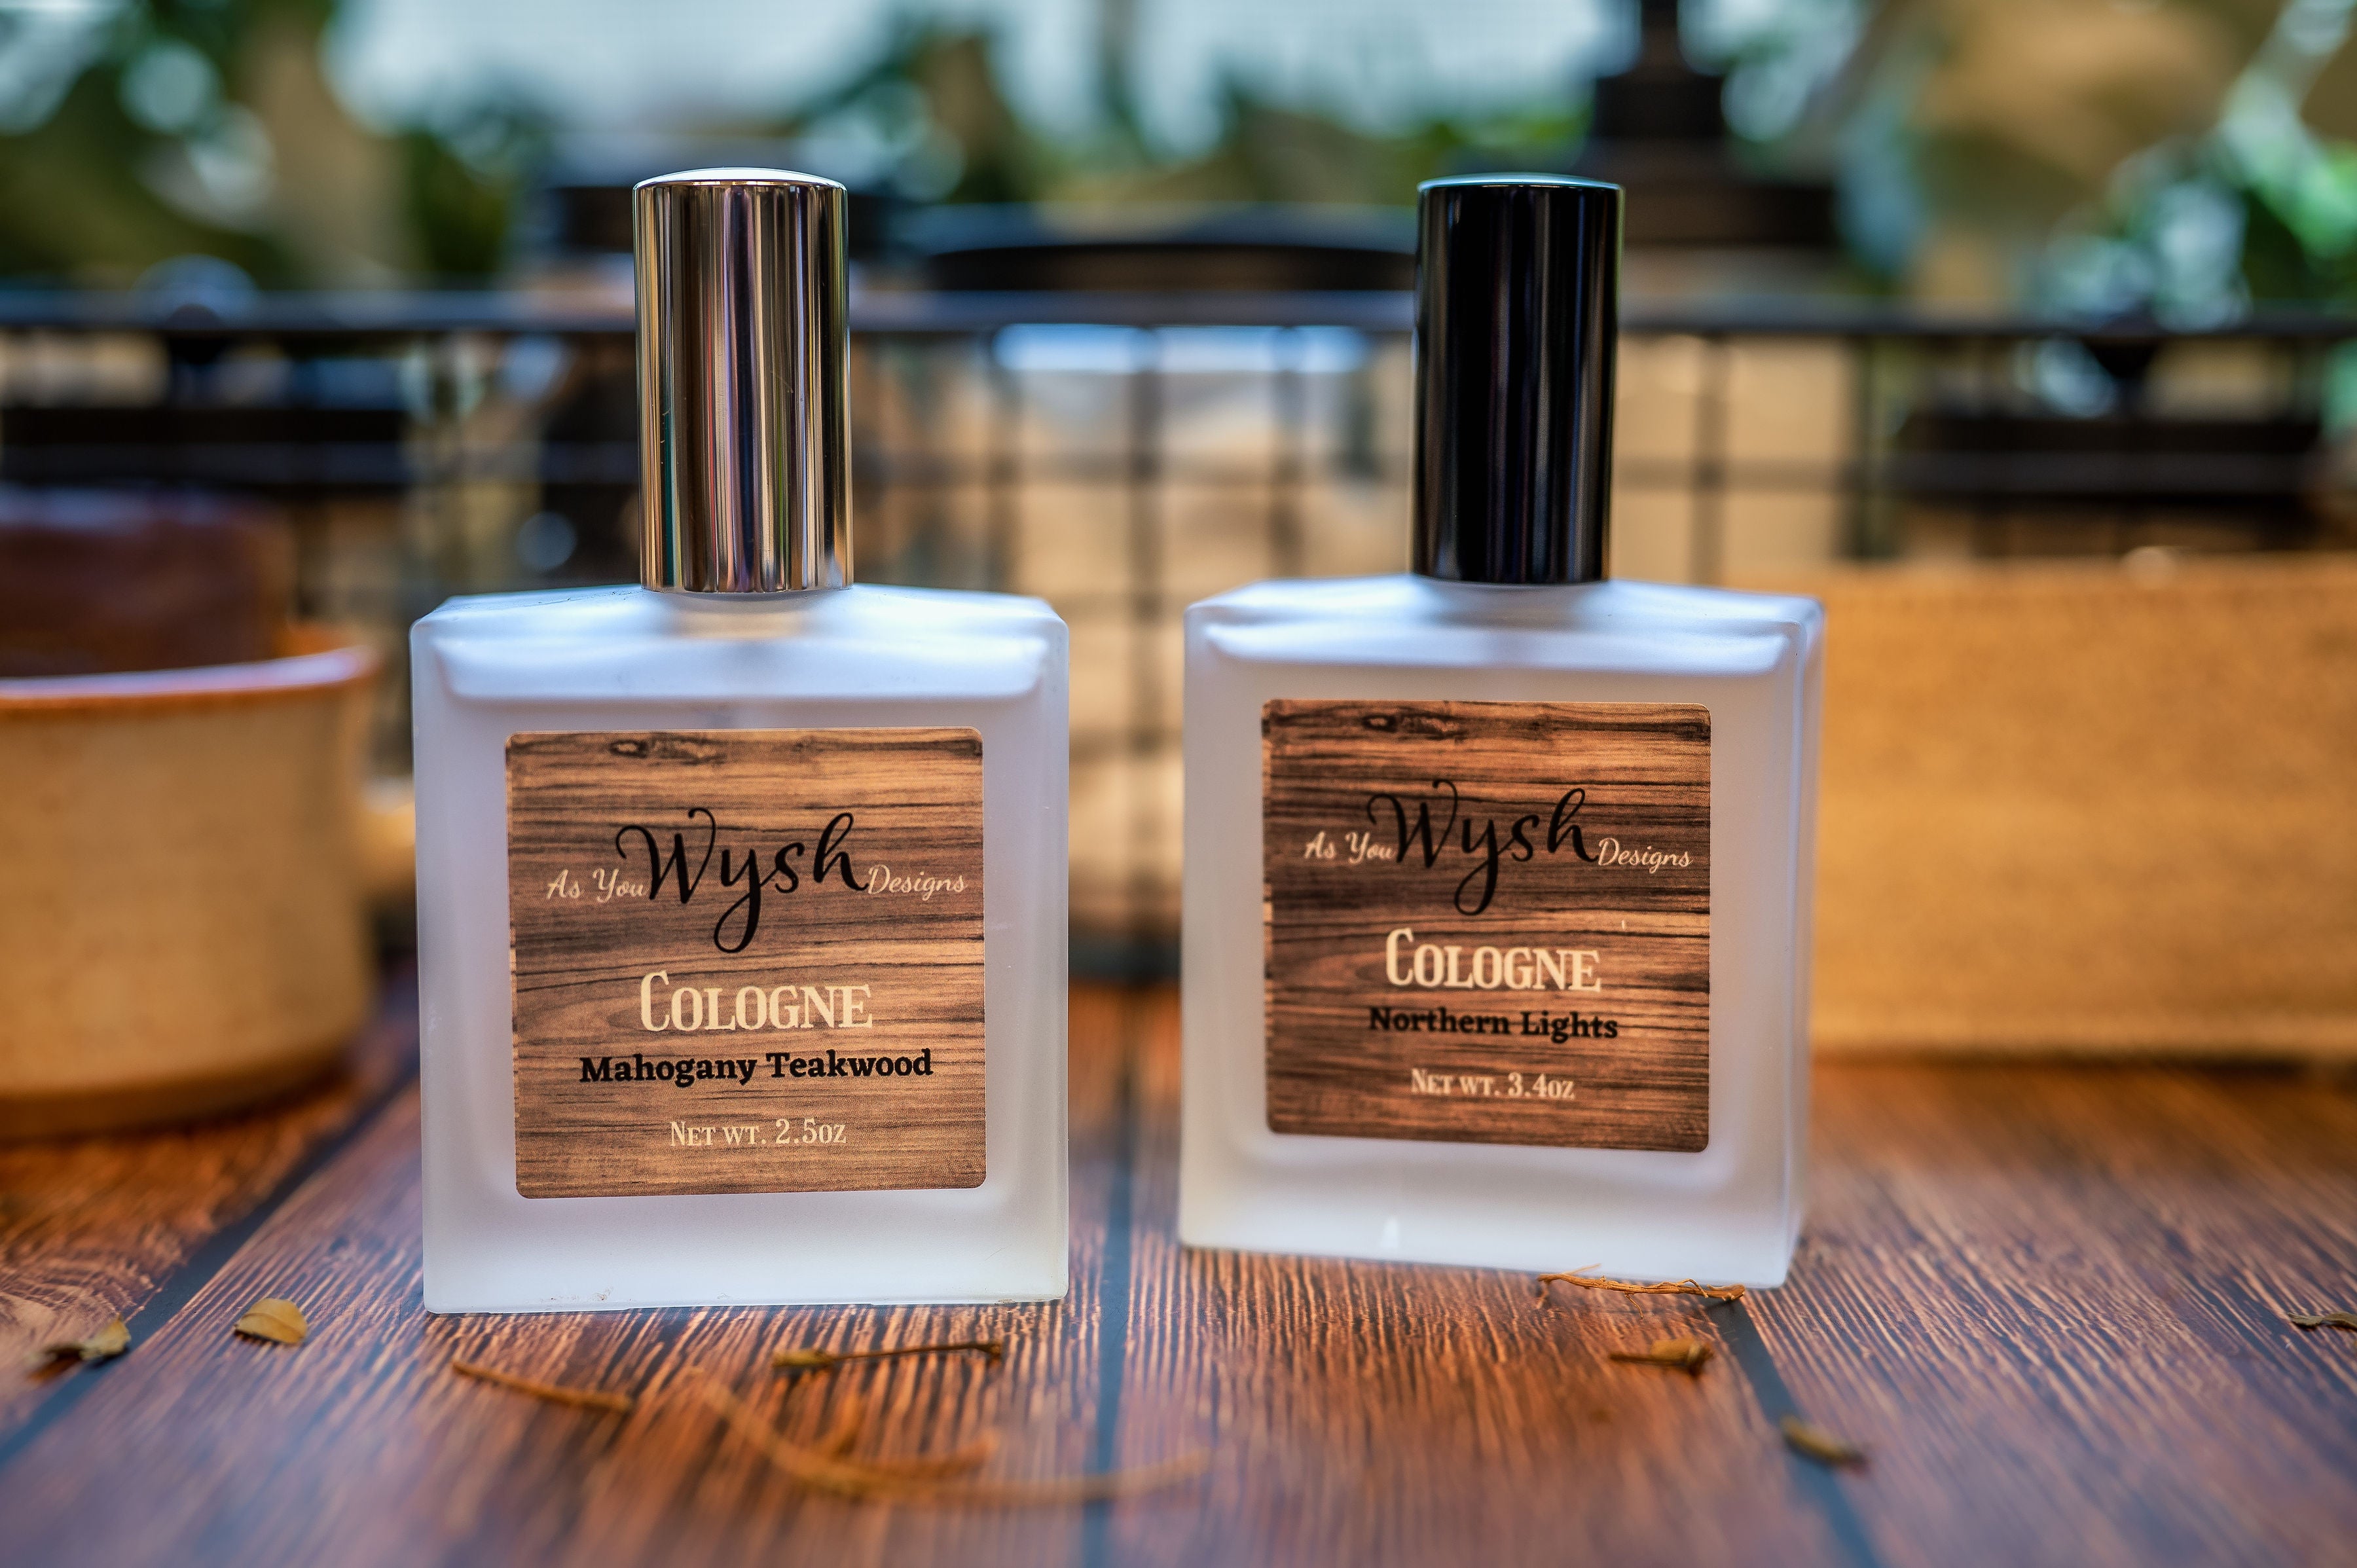 Cologne – As You Wysh Designs